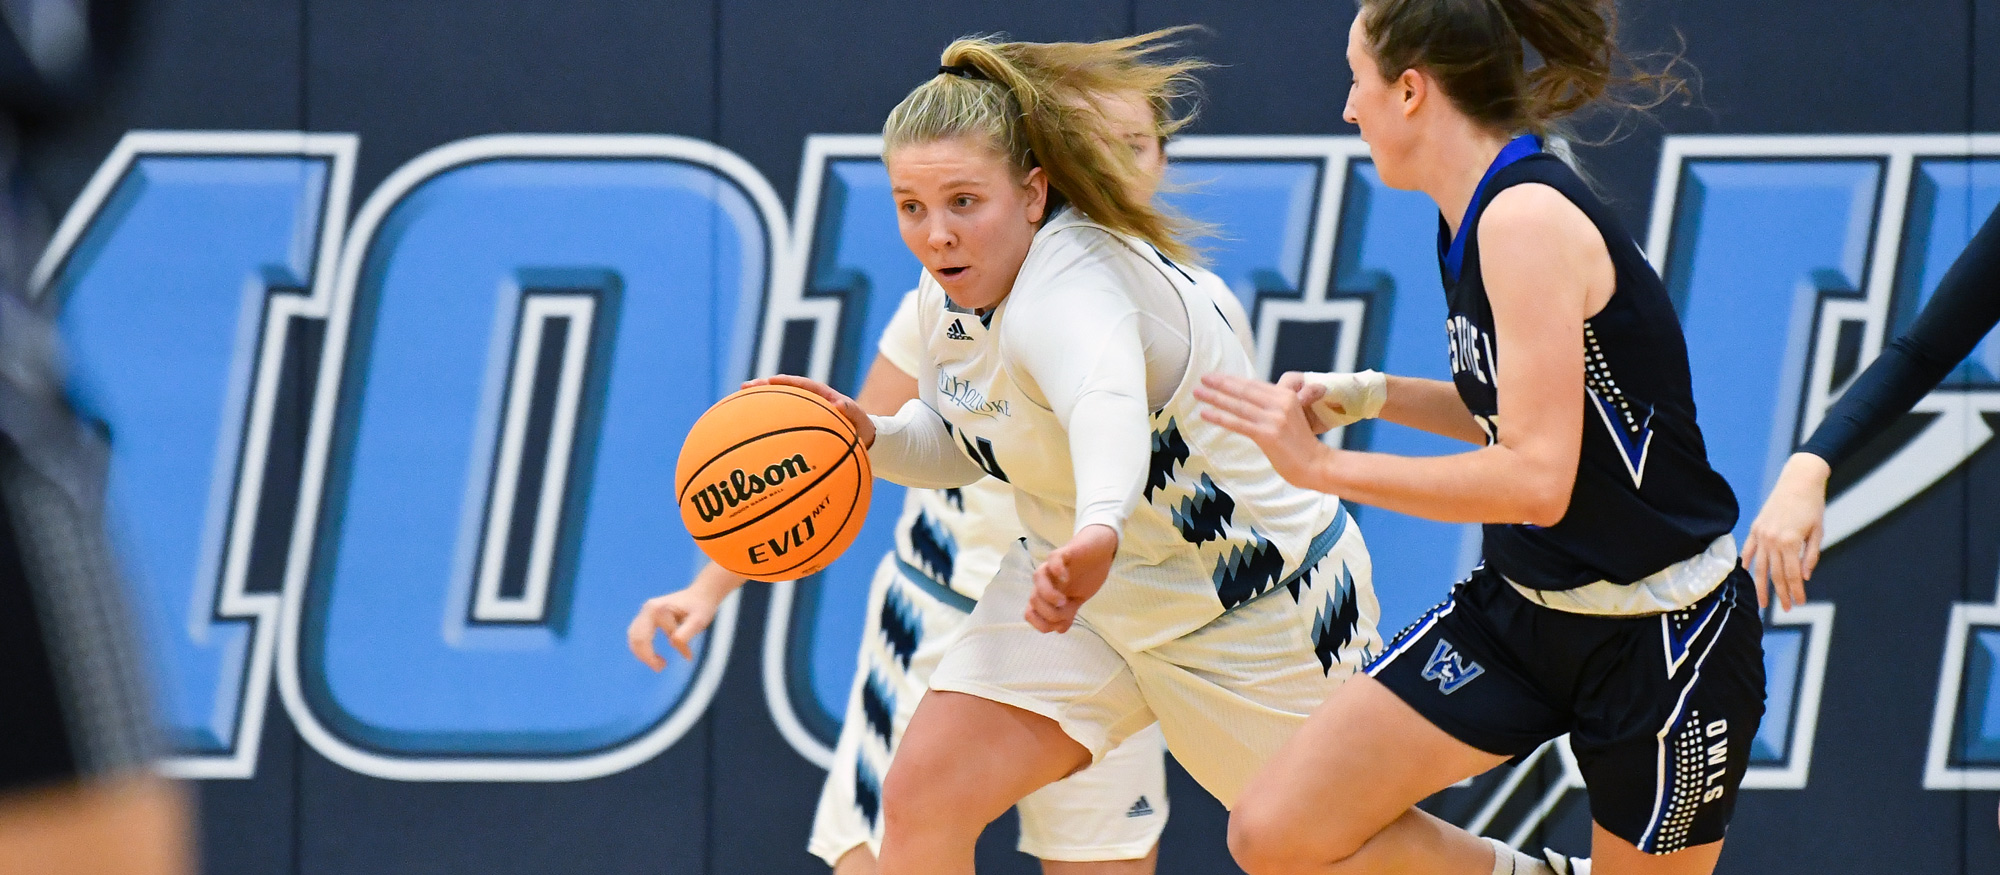 Cal McGonagle scored 12 points and grabbed 13 rebounds with five assists in Mount Holyoke's loss to Westfield State on Nov. 22, 2022. (Bob Blanchard/RJB Sports)